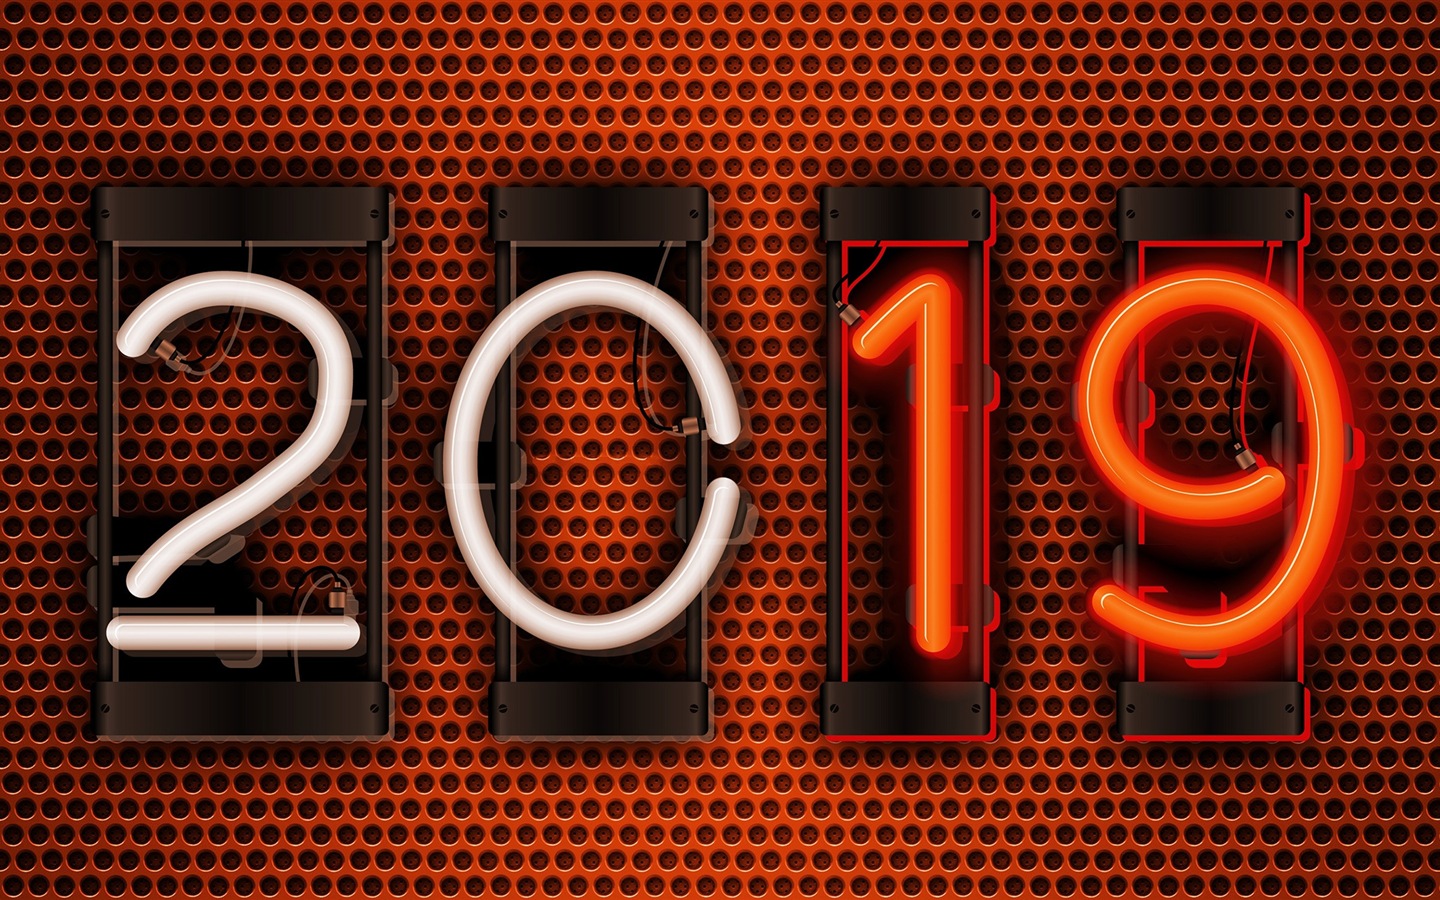 Happy New Year 2019 HD wallpapers #3 - 1440x900